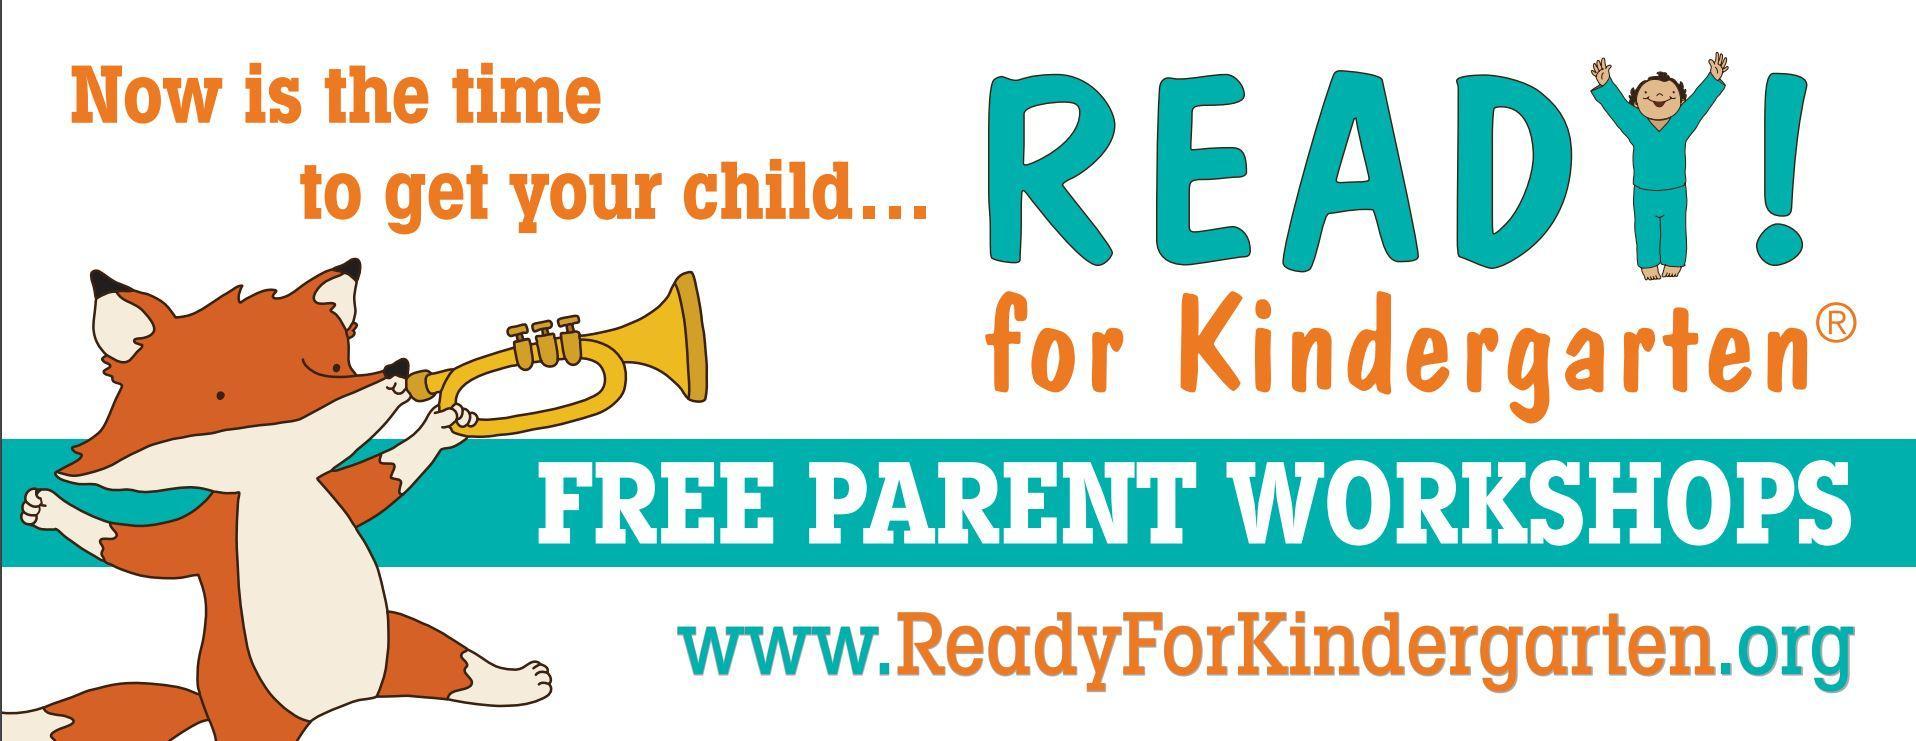 Banner art supplied by Ready! for Kindergarten featuring a fox blowing a  horn calling out for families to get ready for kindergarten